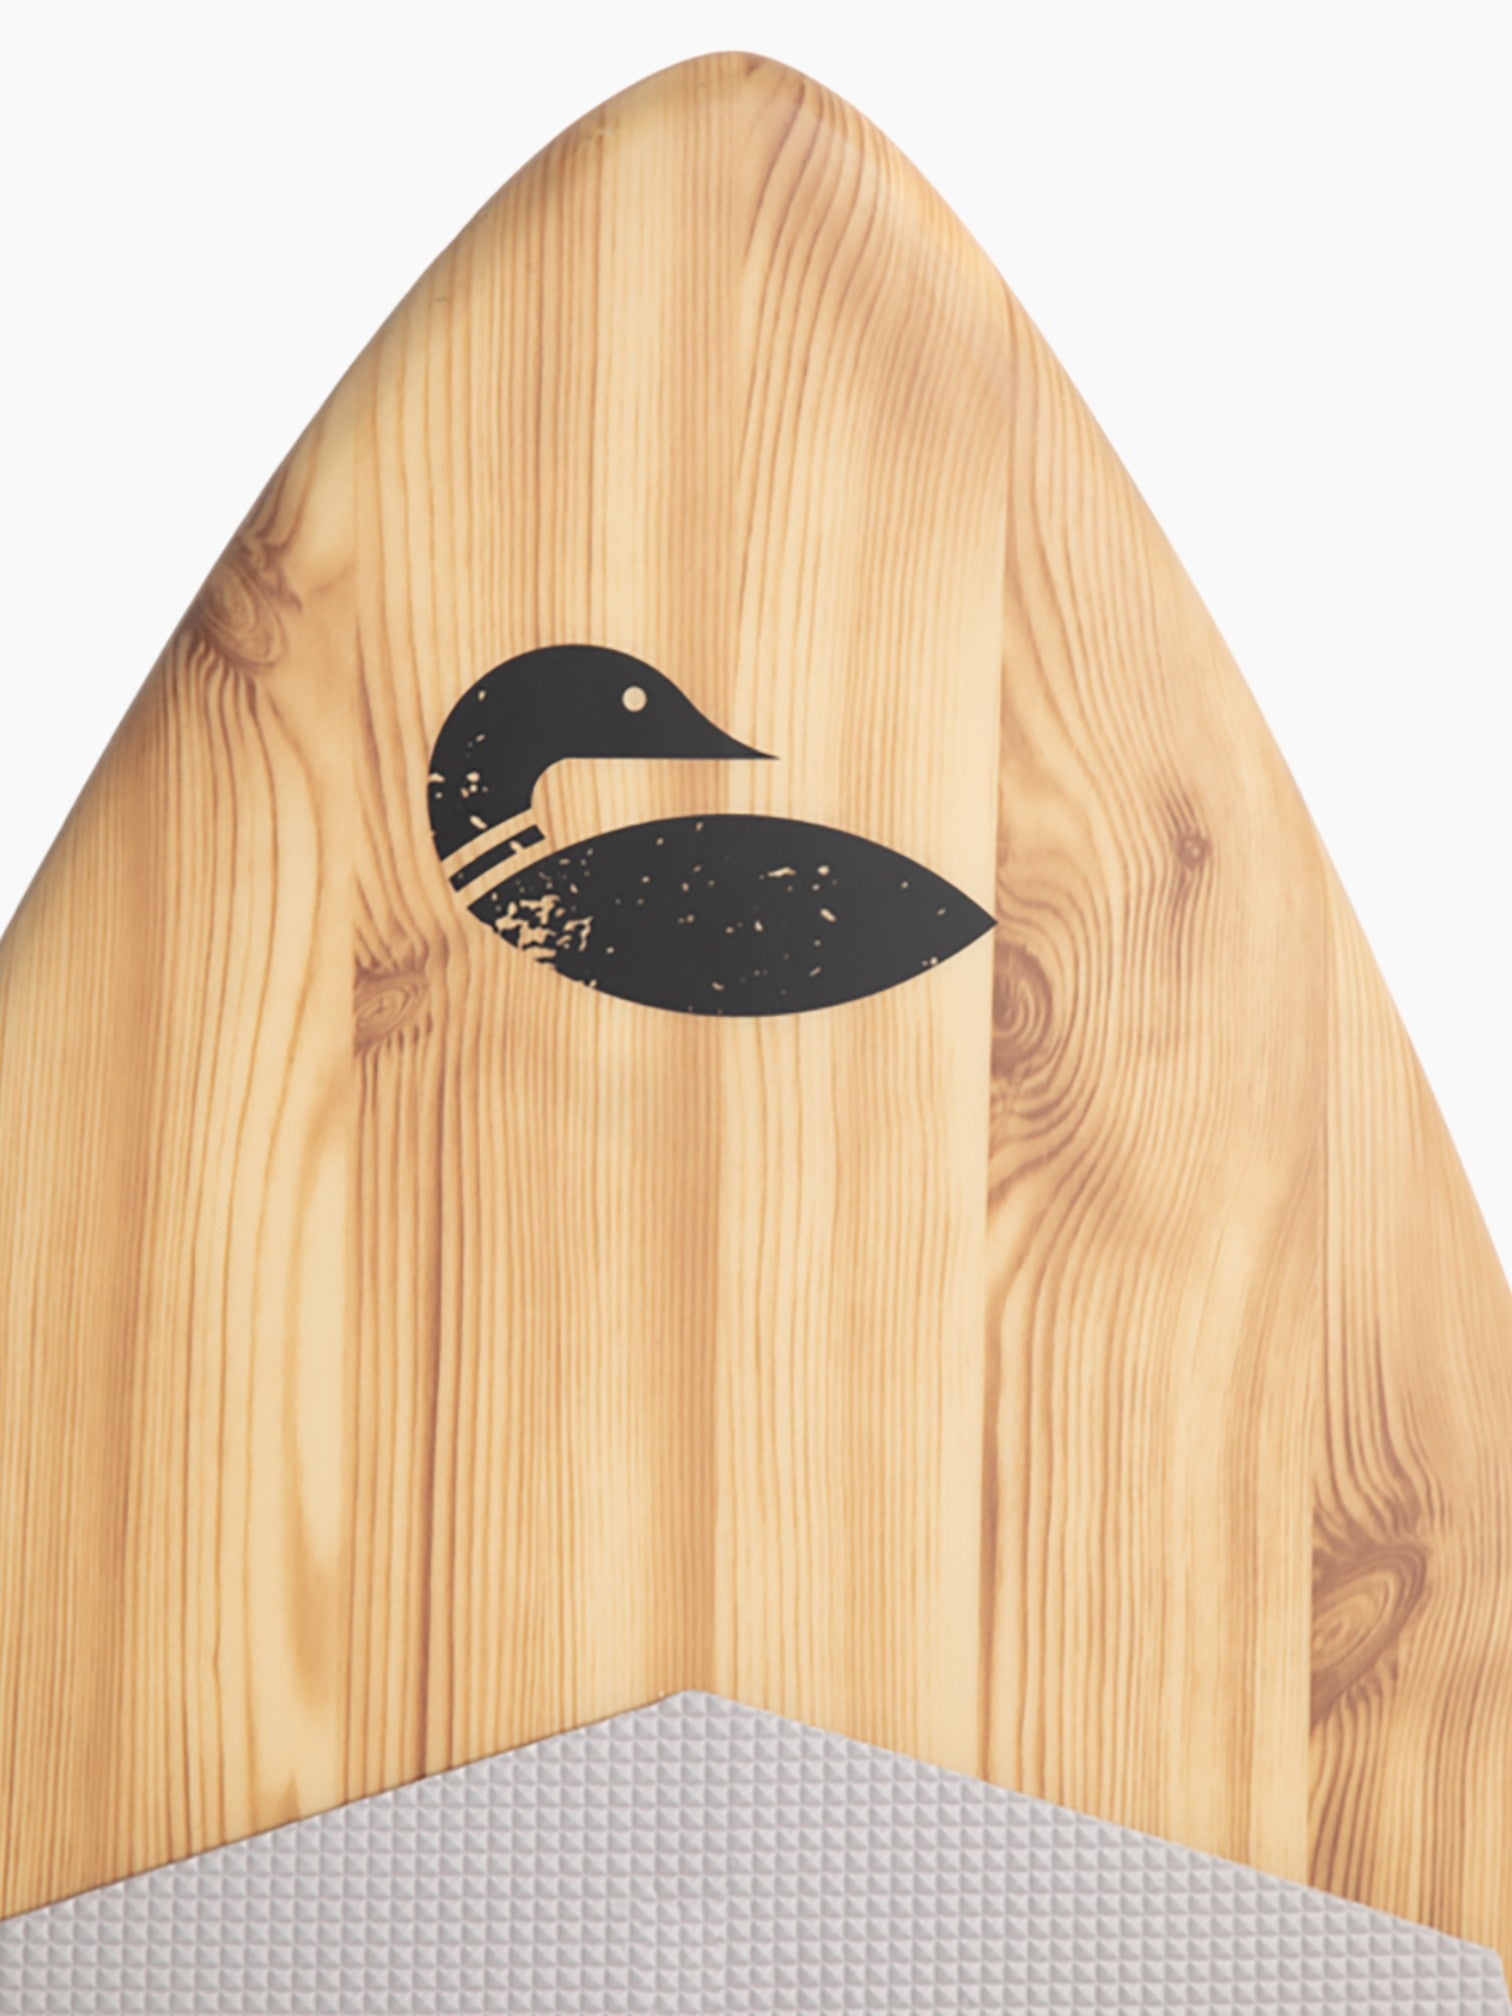 Close up photo of a wooden lake surfer with a black loon on it.